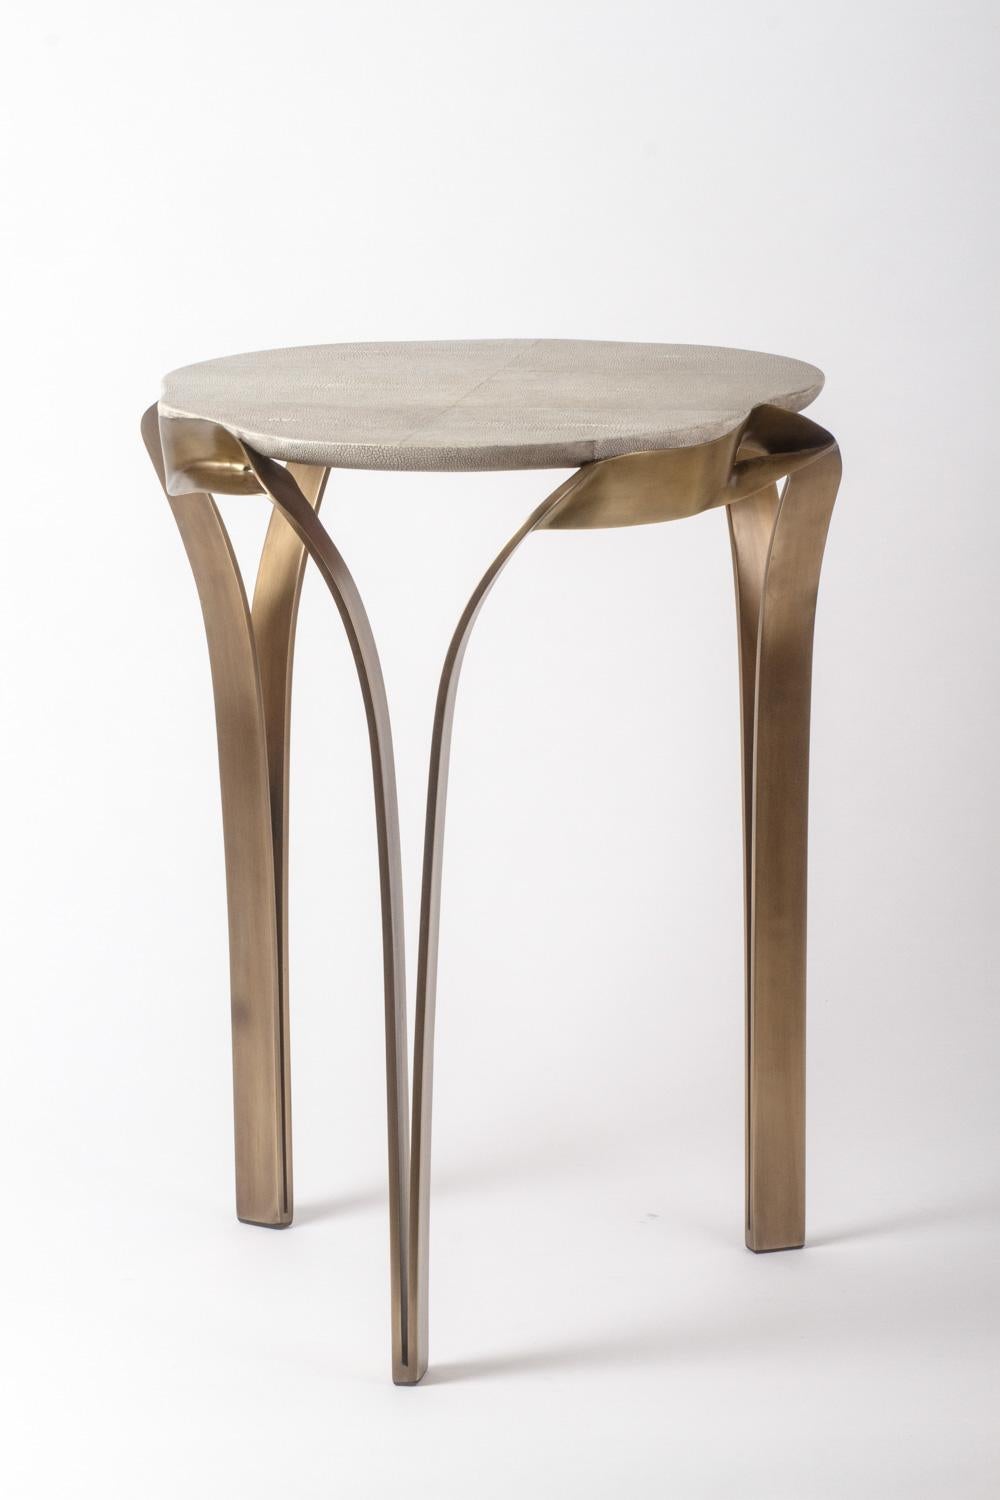 The organic design of the angel falls side table, is inspired by one of the world’s most beautiful waterfalls. The amorphous shaped top in cream shagreen is elegantly wrapped with a bronze-patina brass frame that melts into the table's legs.

The